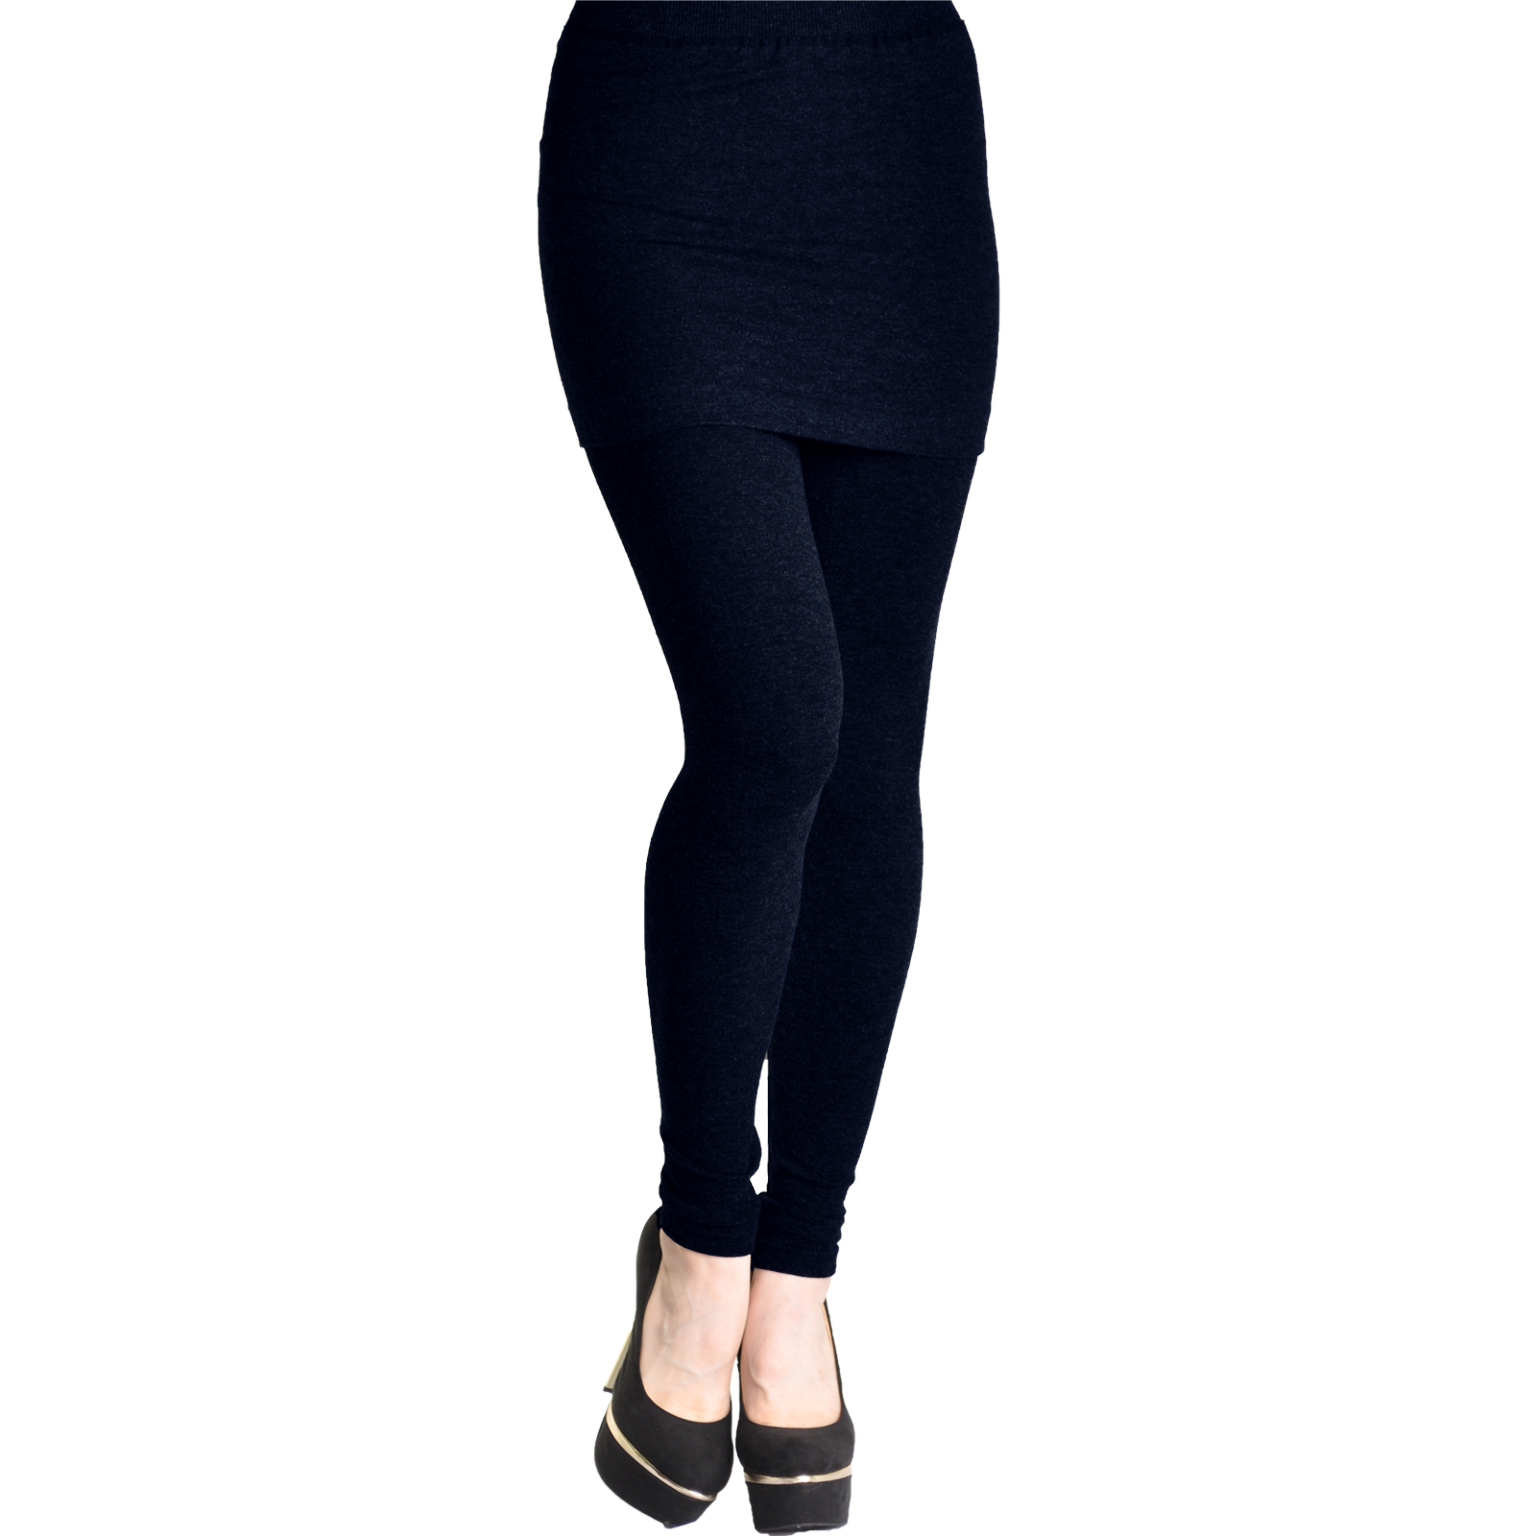  Angelina Women's High Waist Leggings with Attached